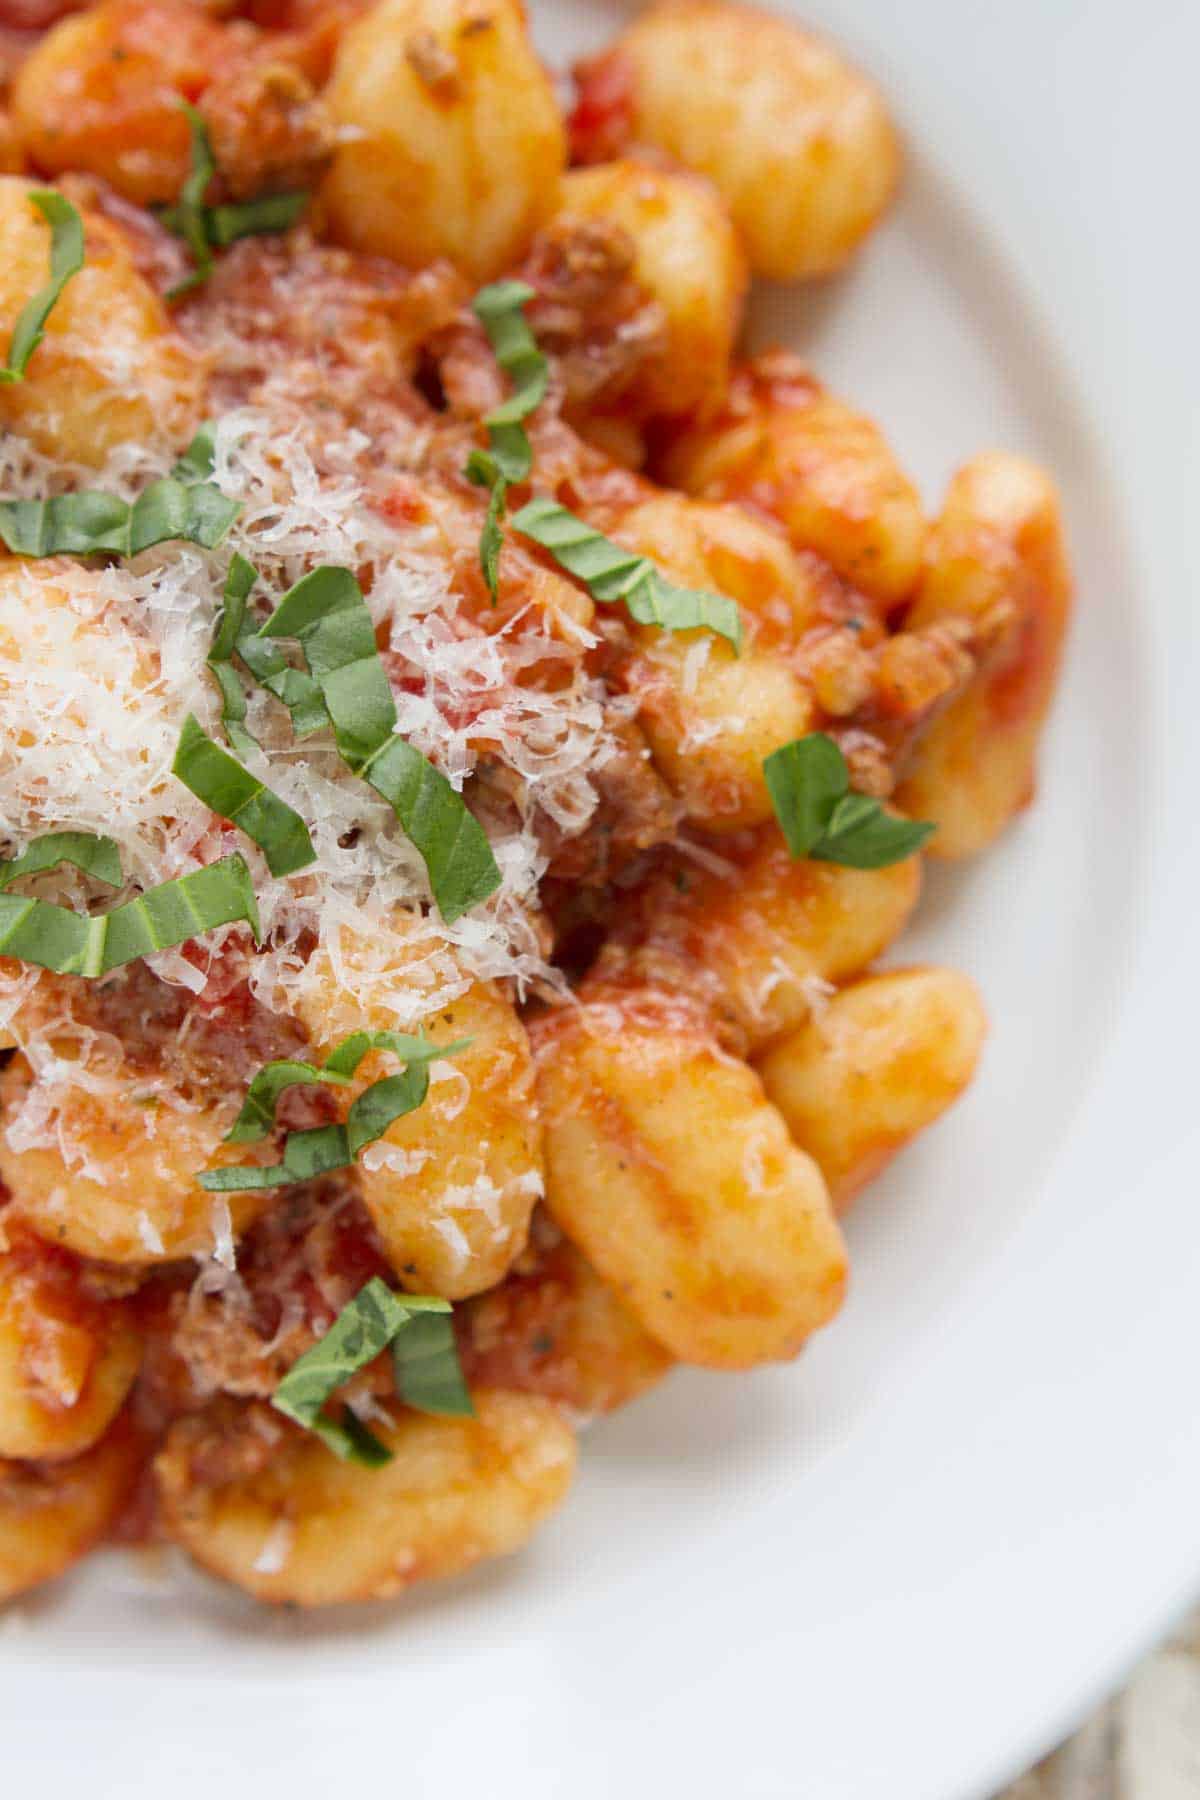 Gnocchi topped with a meat sauce, parmesan, and basil.